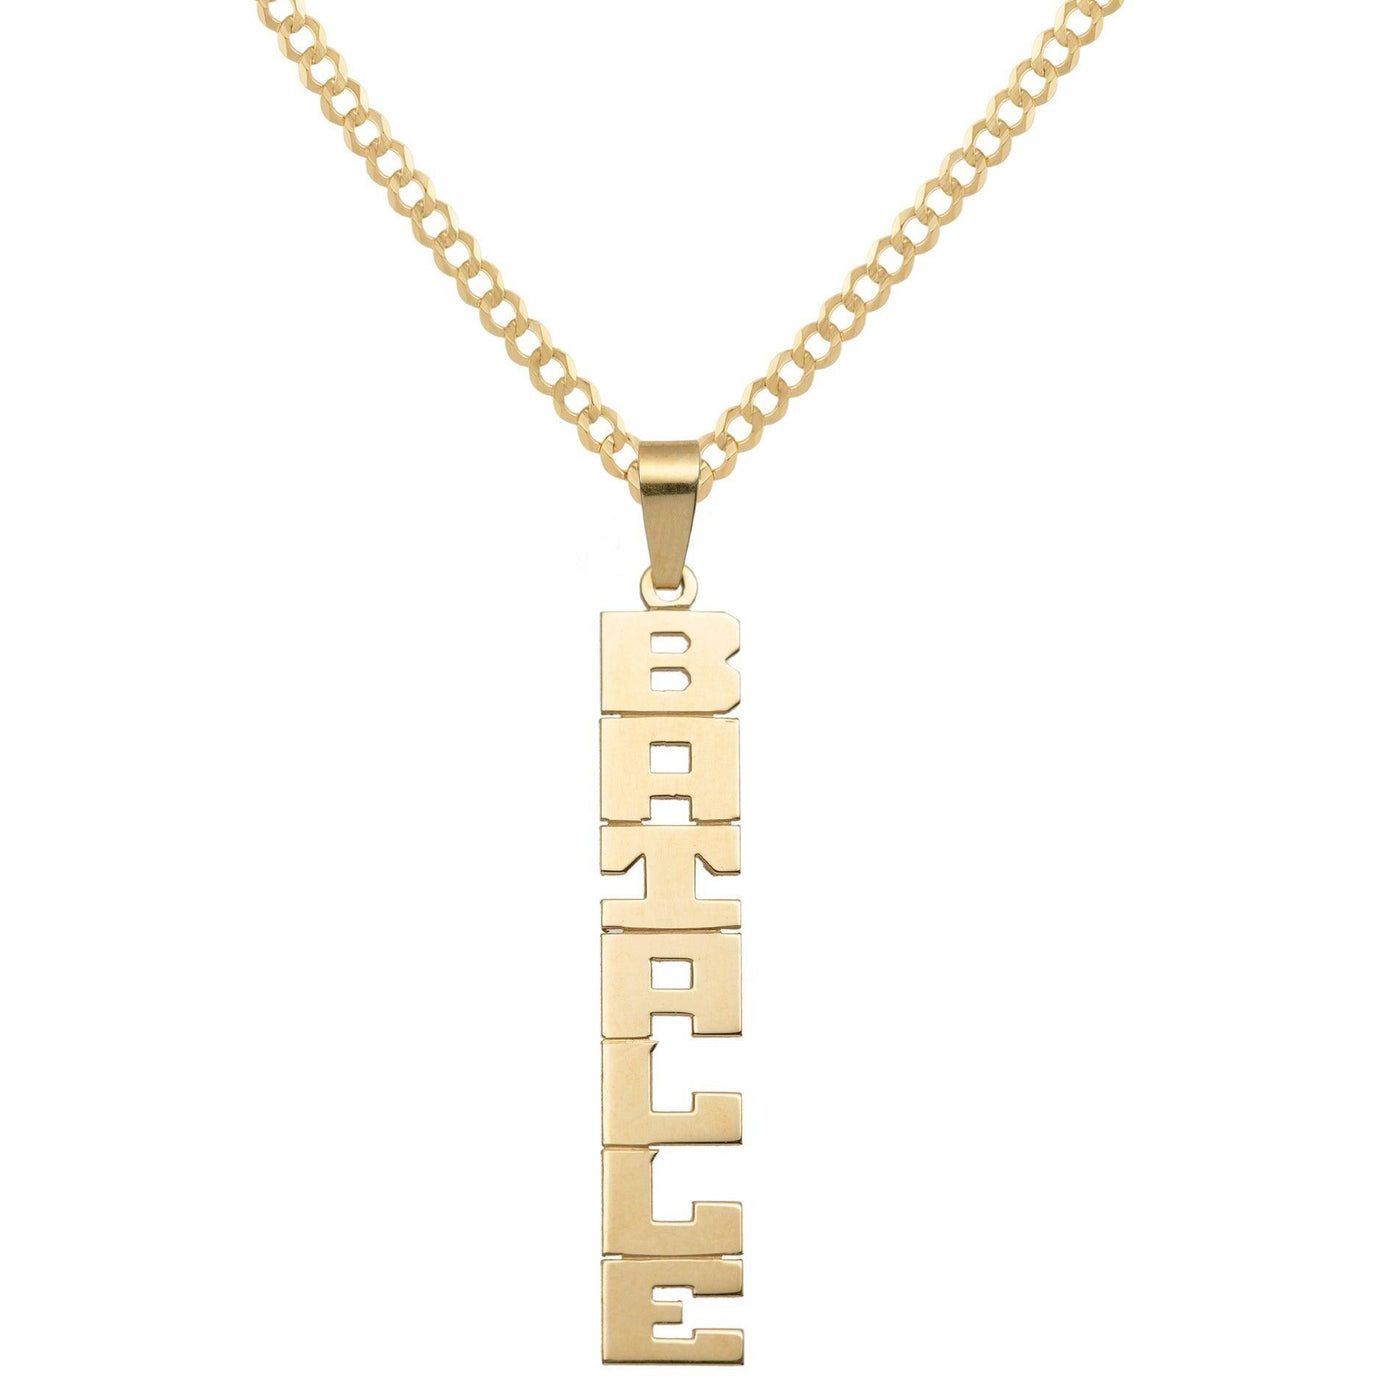 Ladies Vertical Script Name Plate Necklace 14K Gold - Style 90 - bayamjewelry